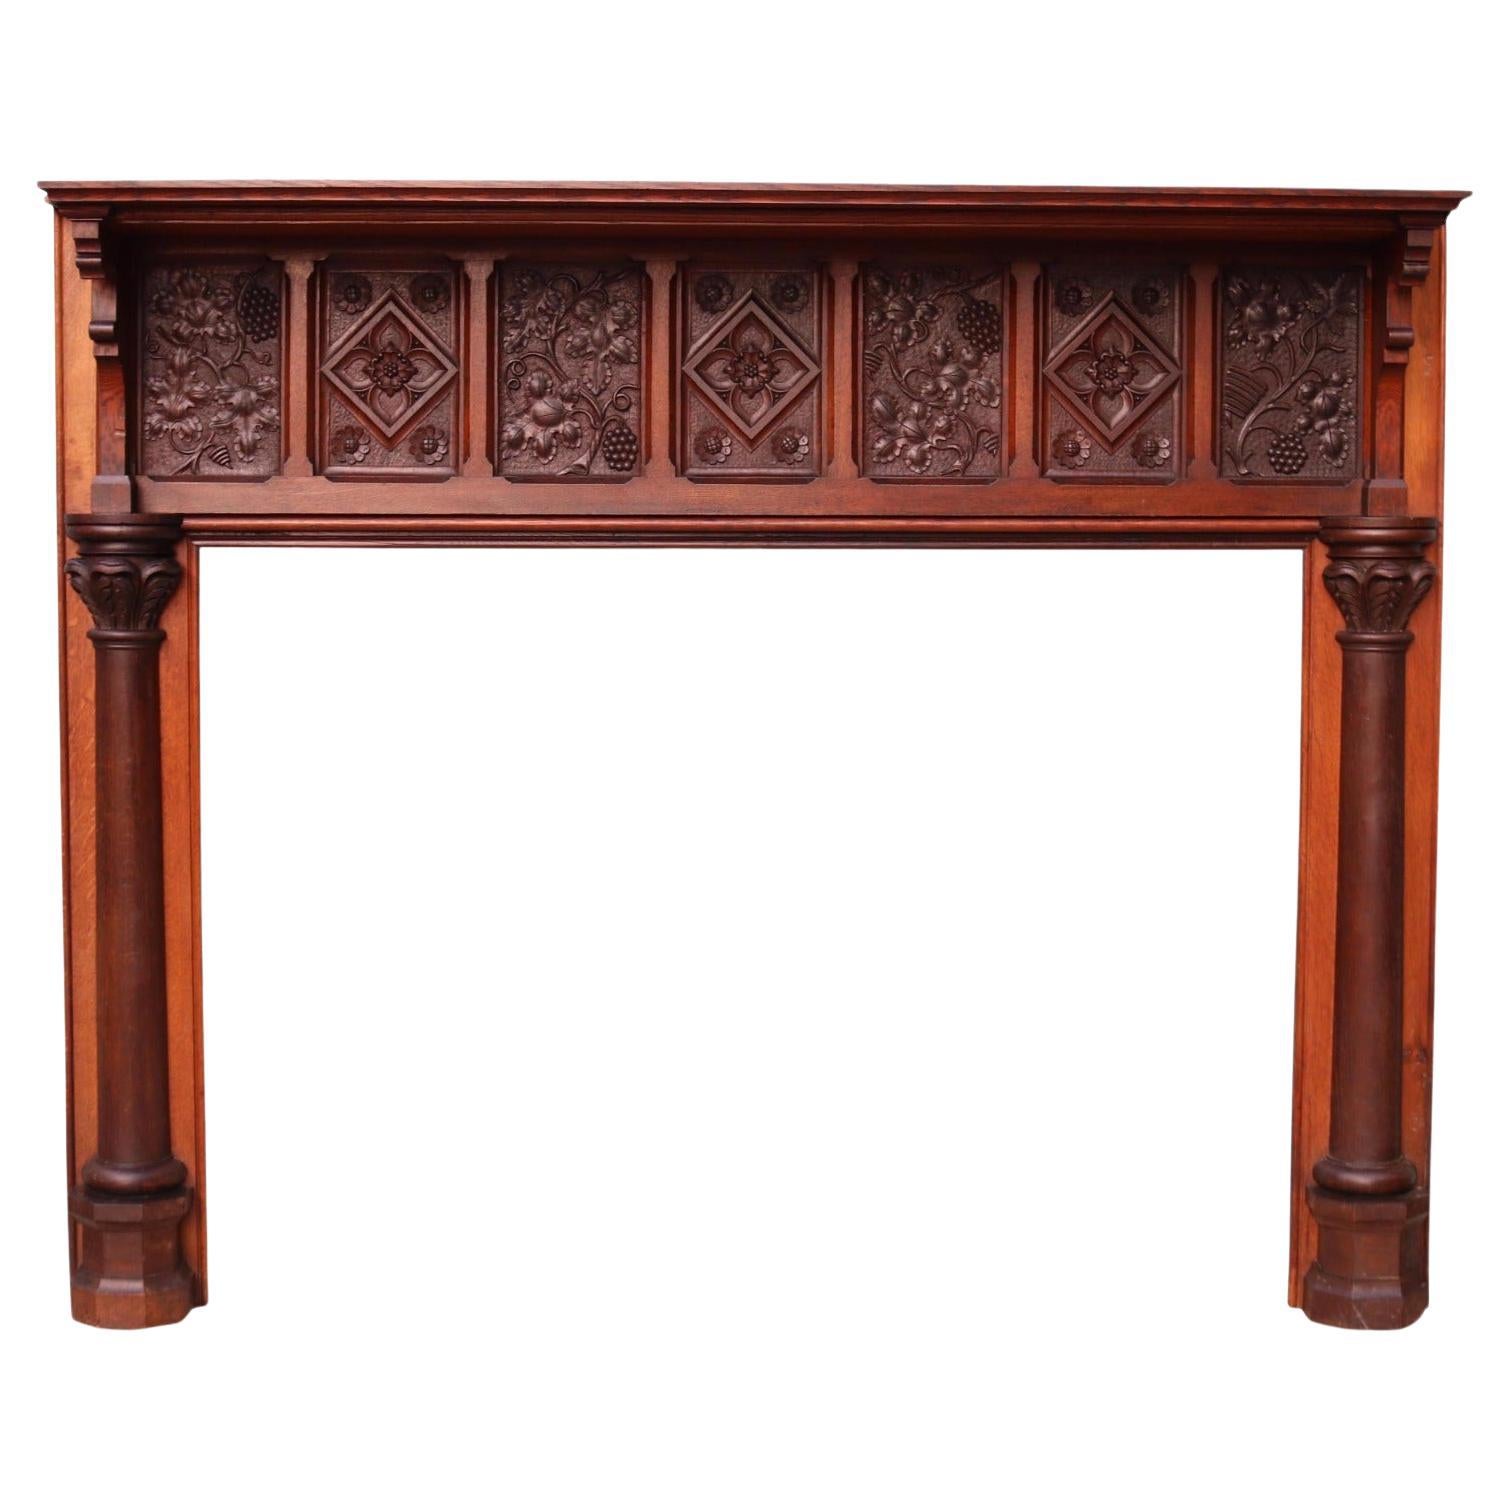 English Arts and Crafts Style Carved Oak Fireplace